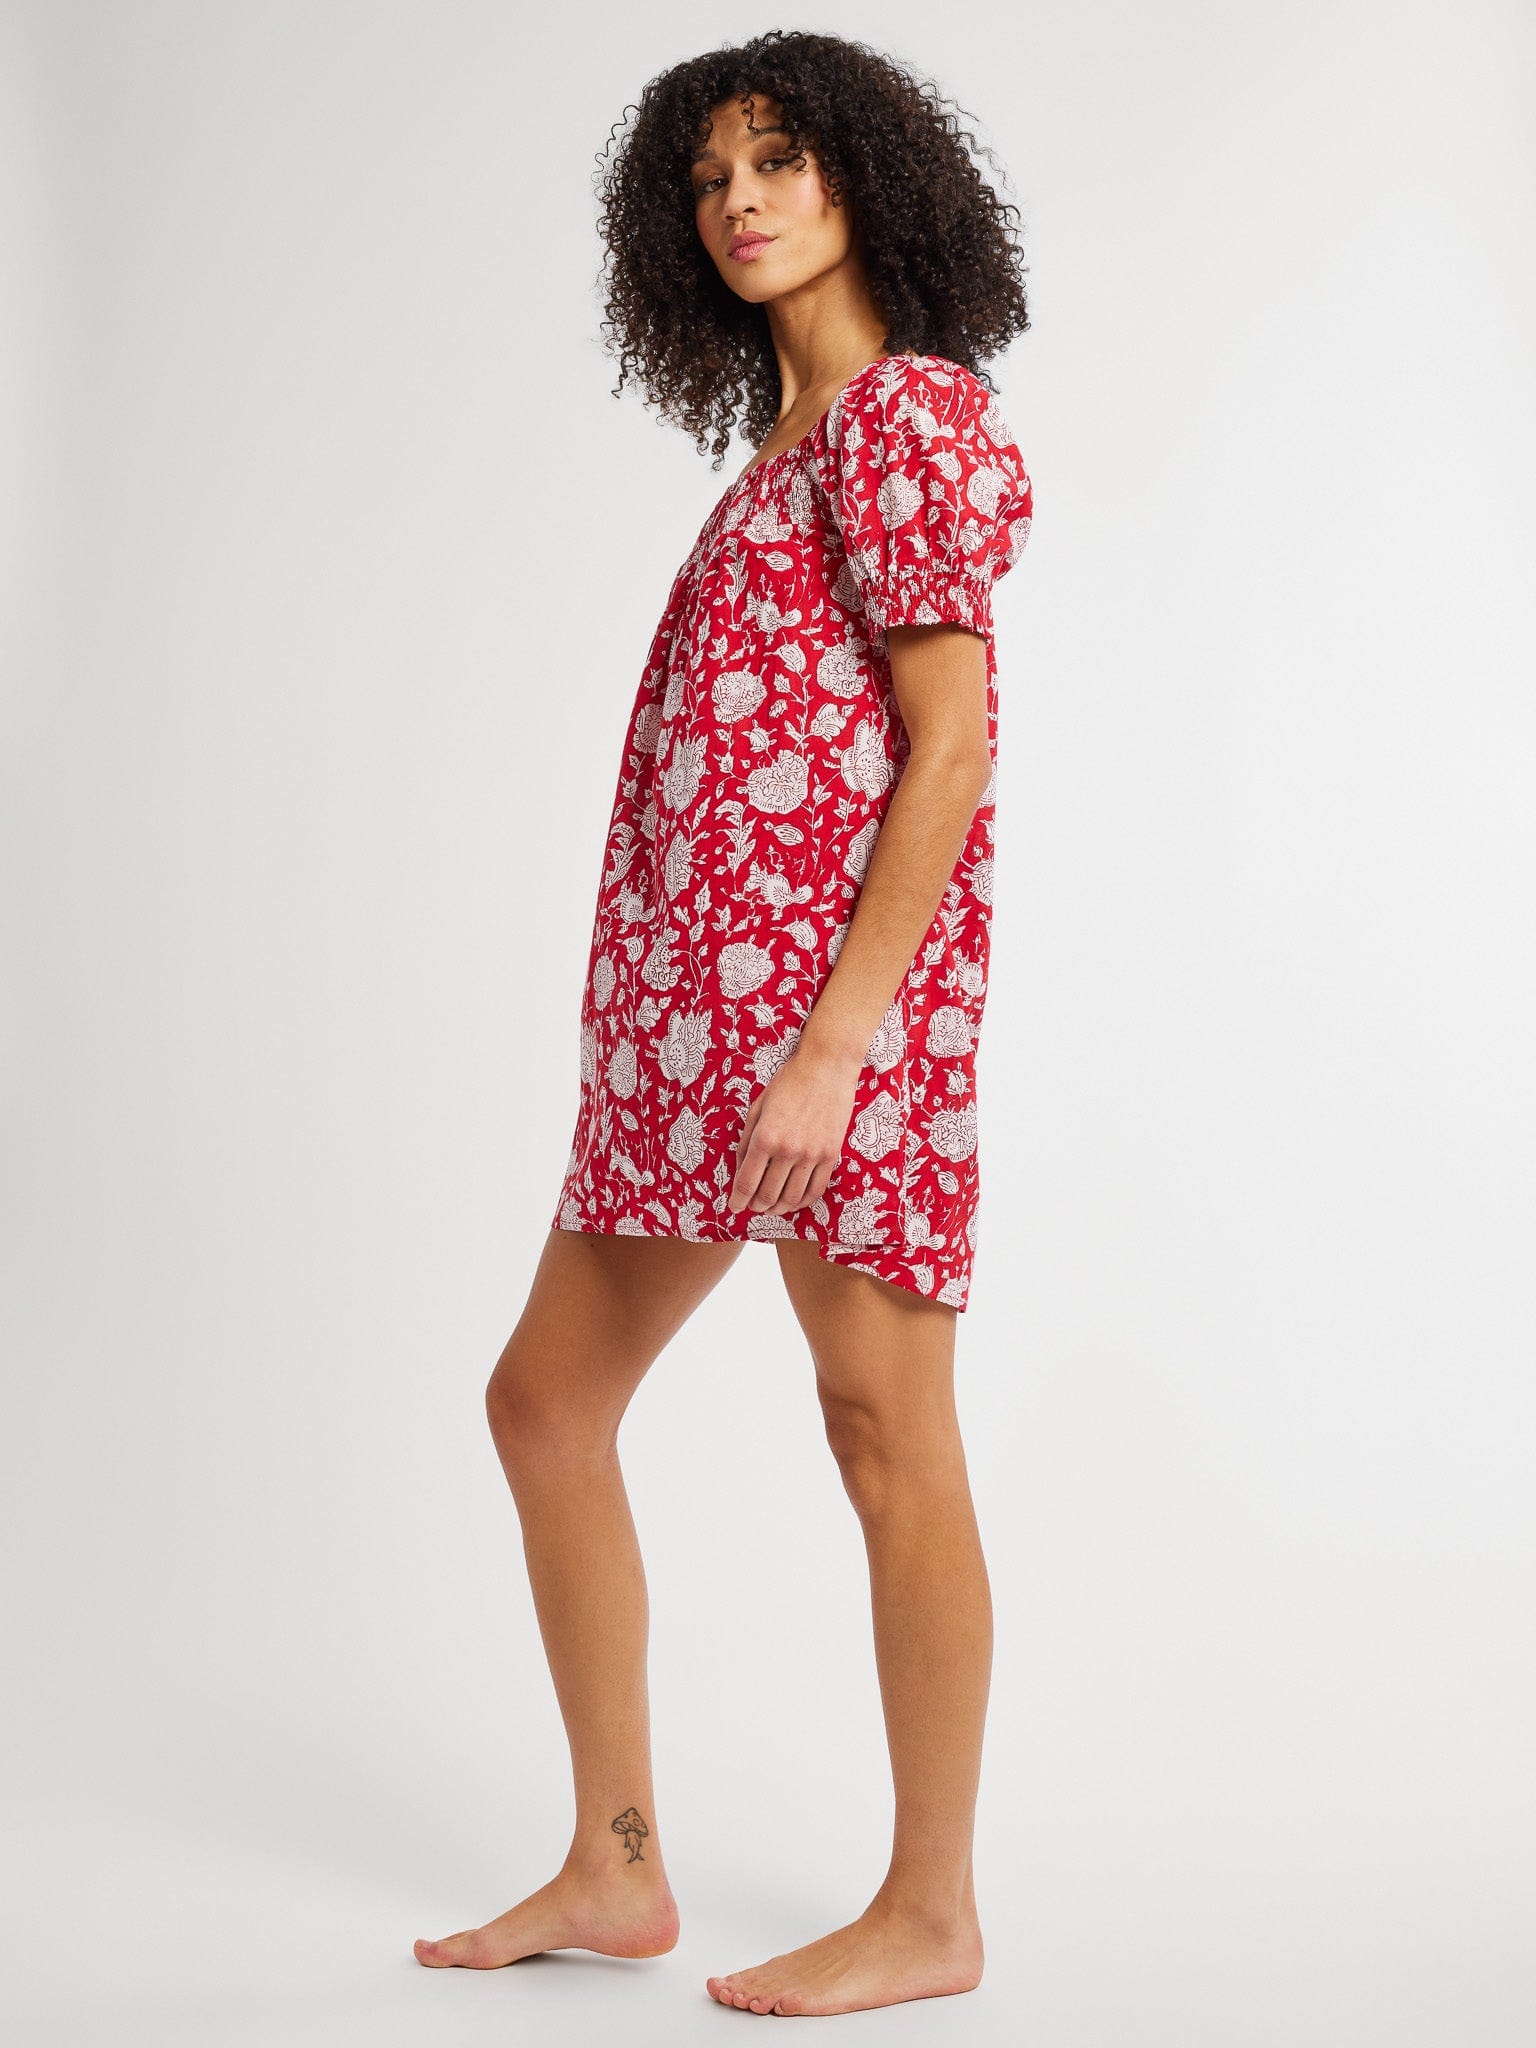 MILLE Clothing Jane Dress in Red Zinnia